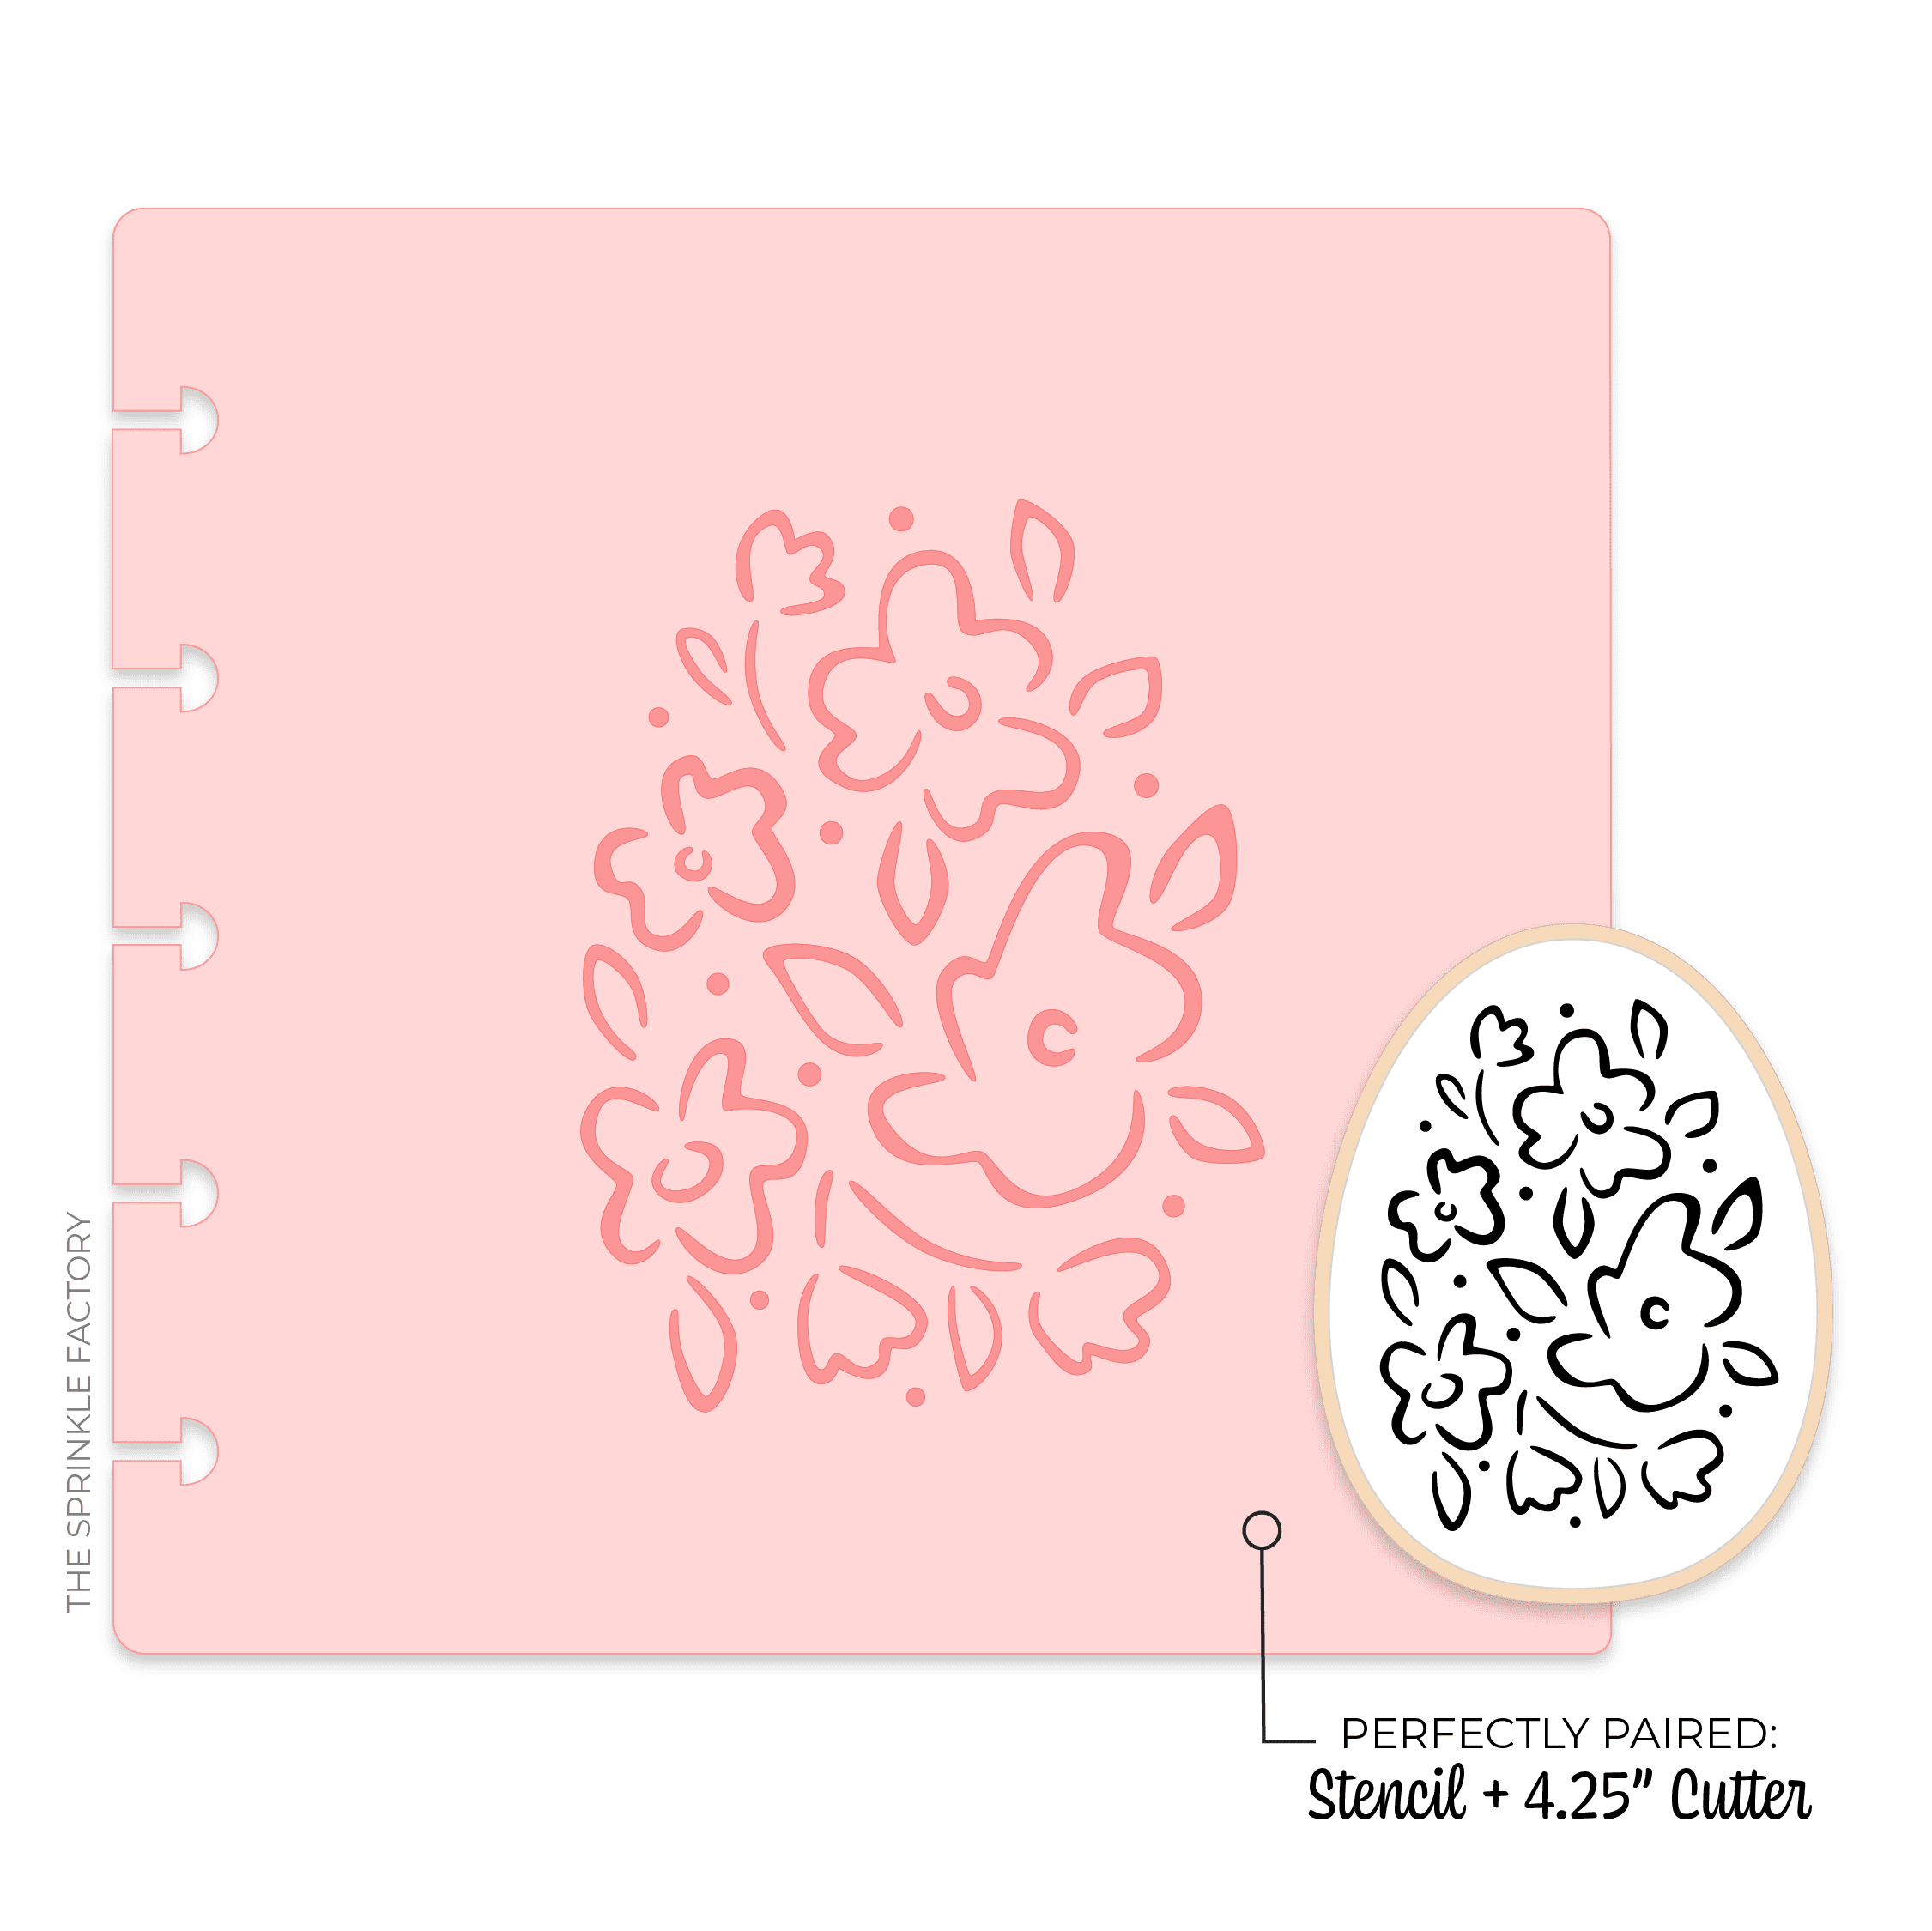 Clipart of a black and white line drawing of an easter egg with flower blooms on it and pink stencil.